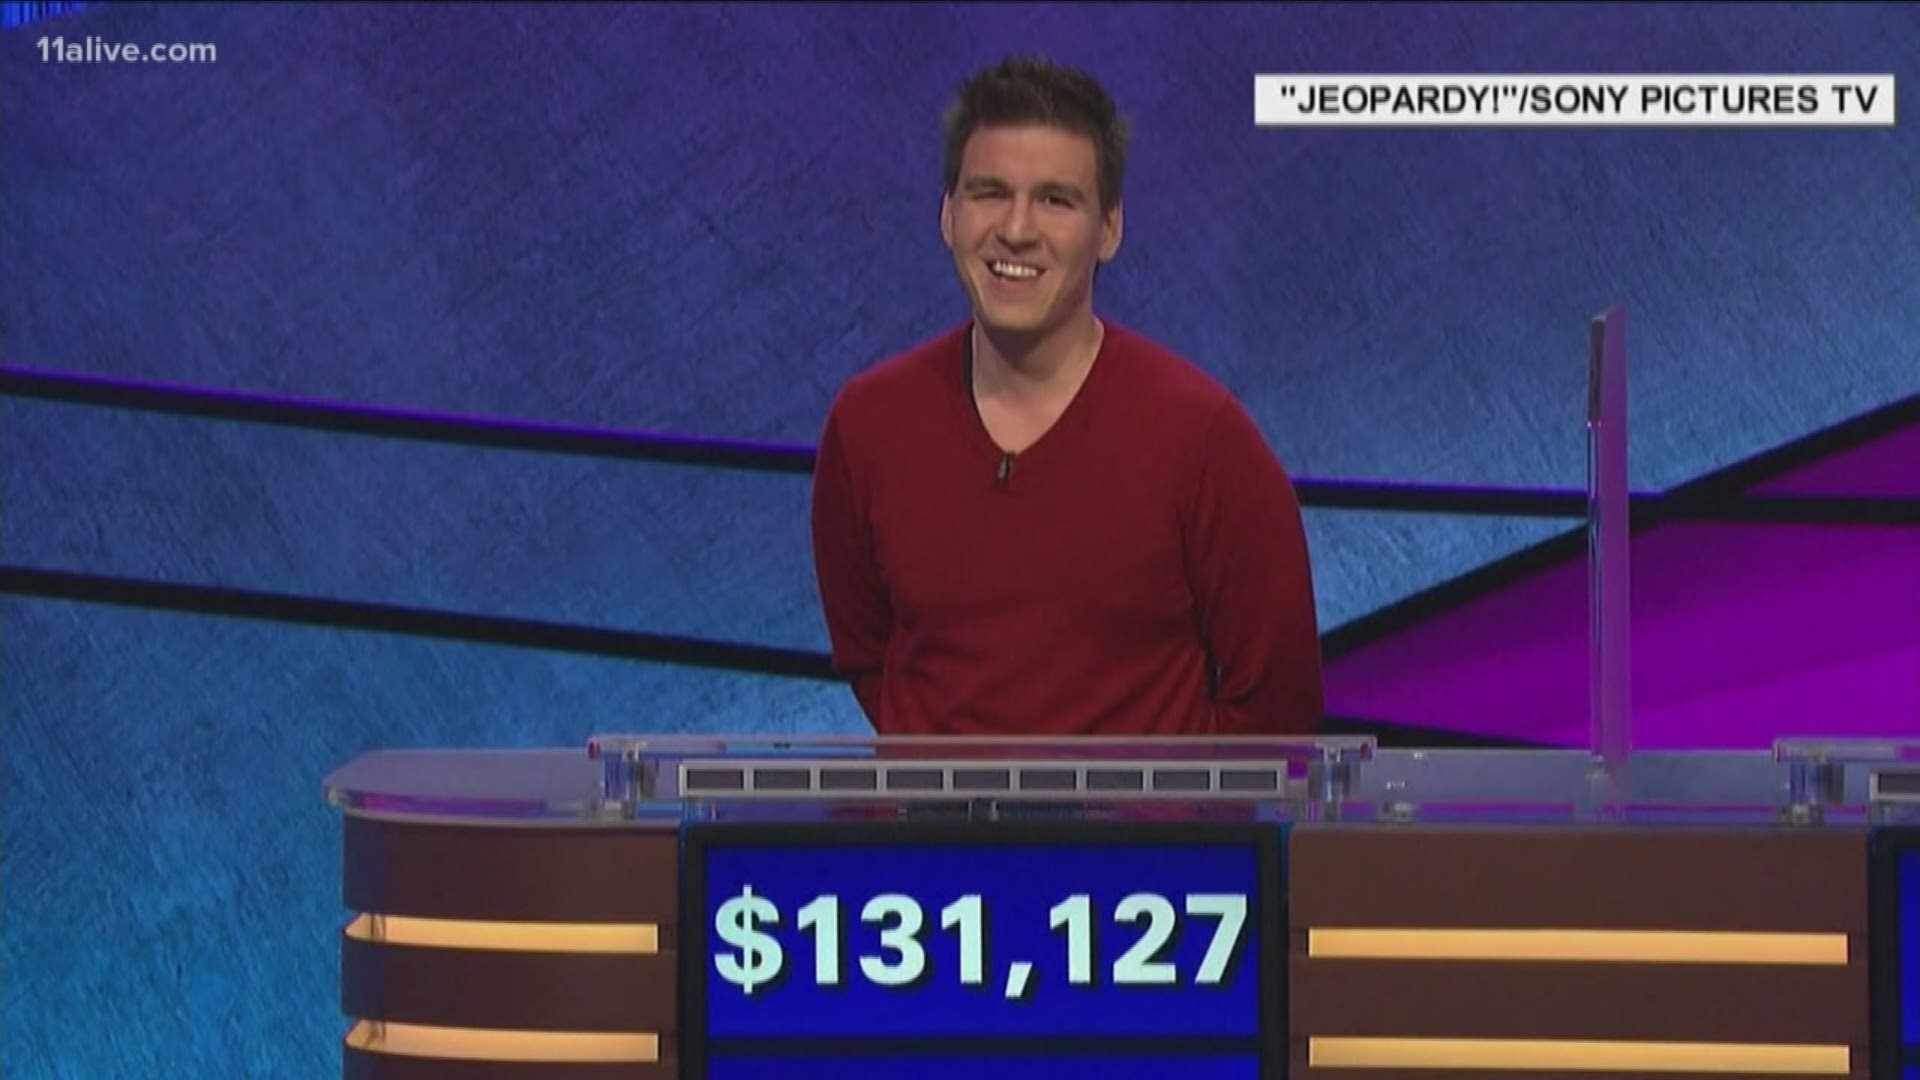 James Holzhauer only won on Monday night by $18, enough however to keep up a record-breaking streak on Jeopardy!